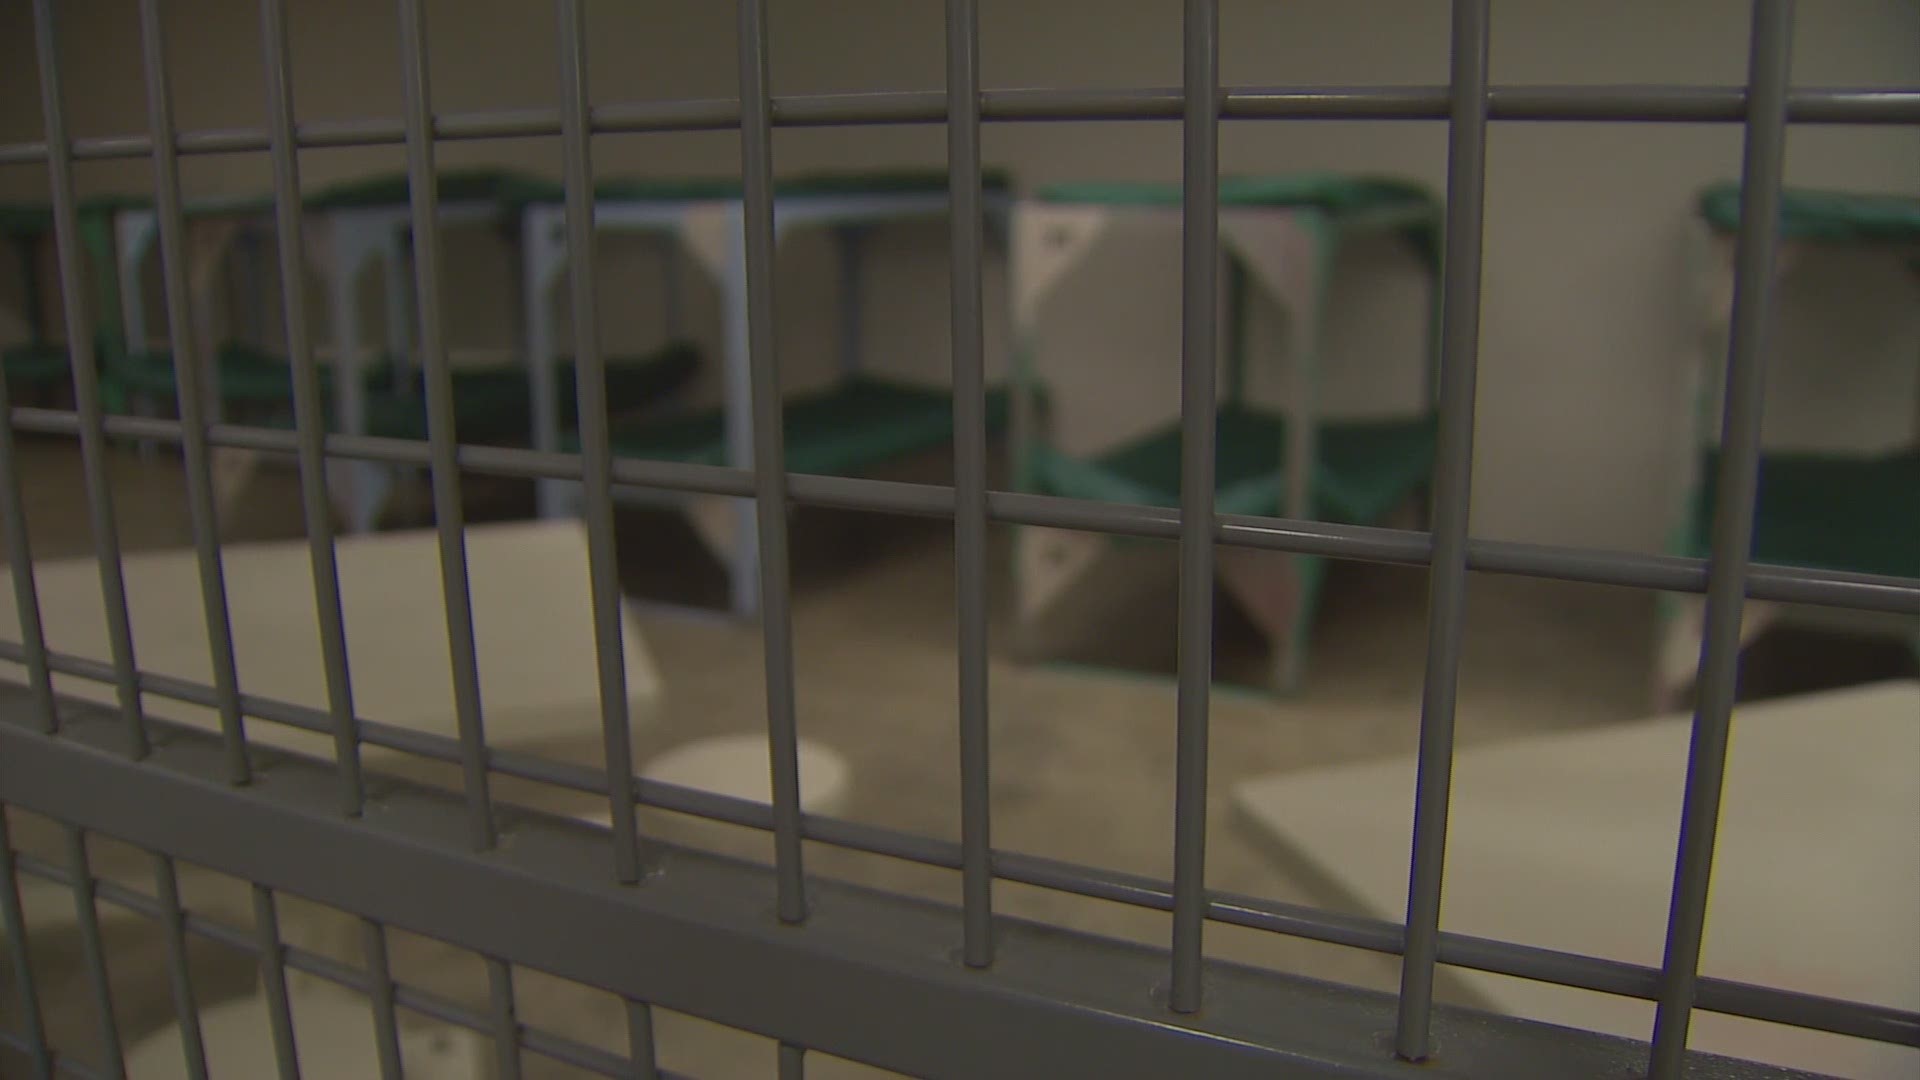 A new report features some eye-opening statistics on inmate deaths in Washington jails.